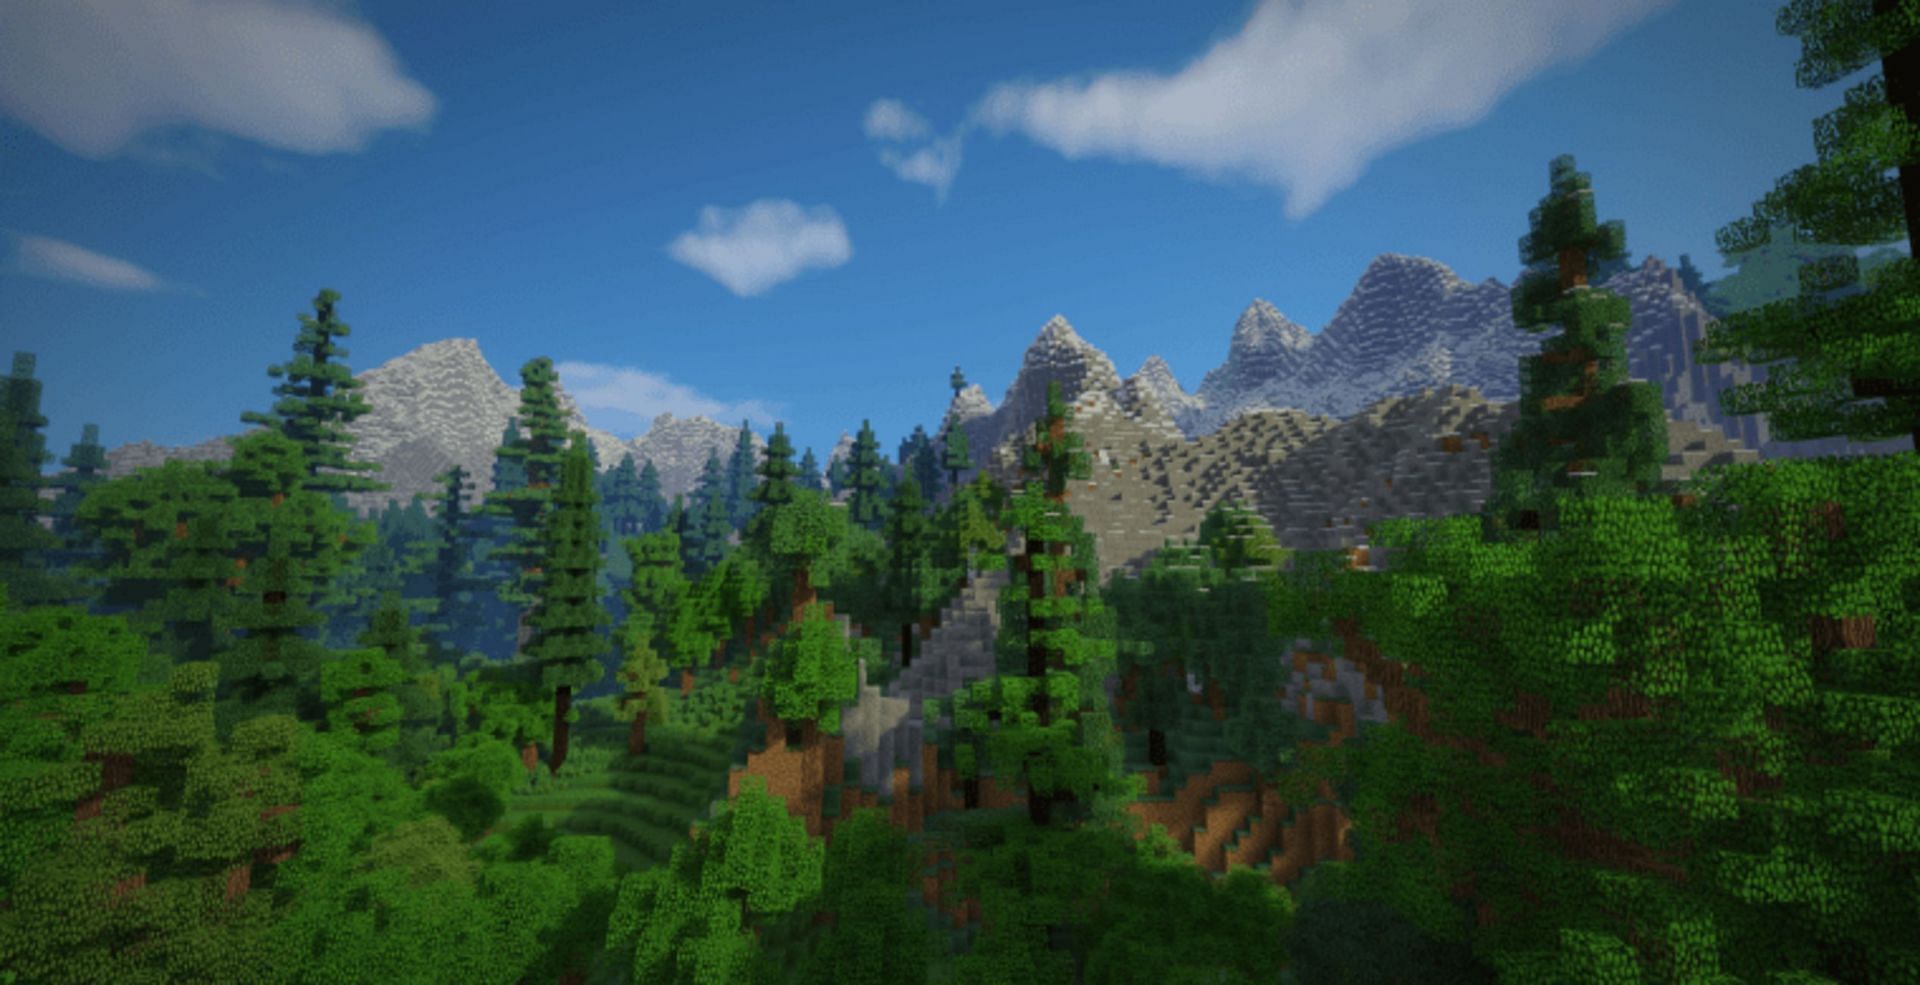 Chocapic&#039;s Shaders make for a great starting point in Minecraft shaders (Image via Shadersmods.com)